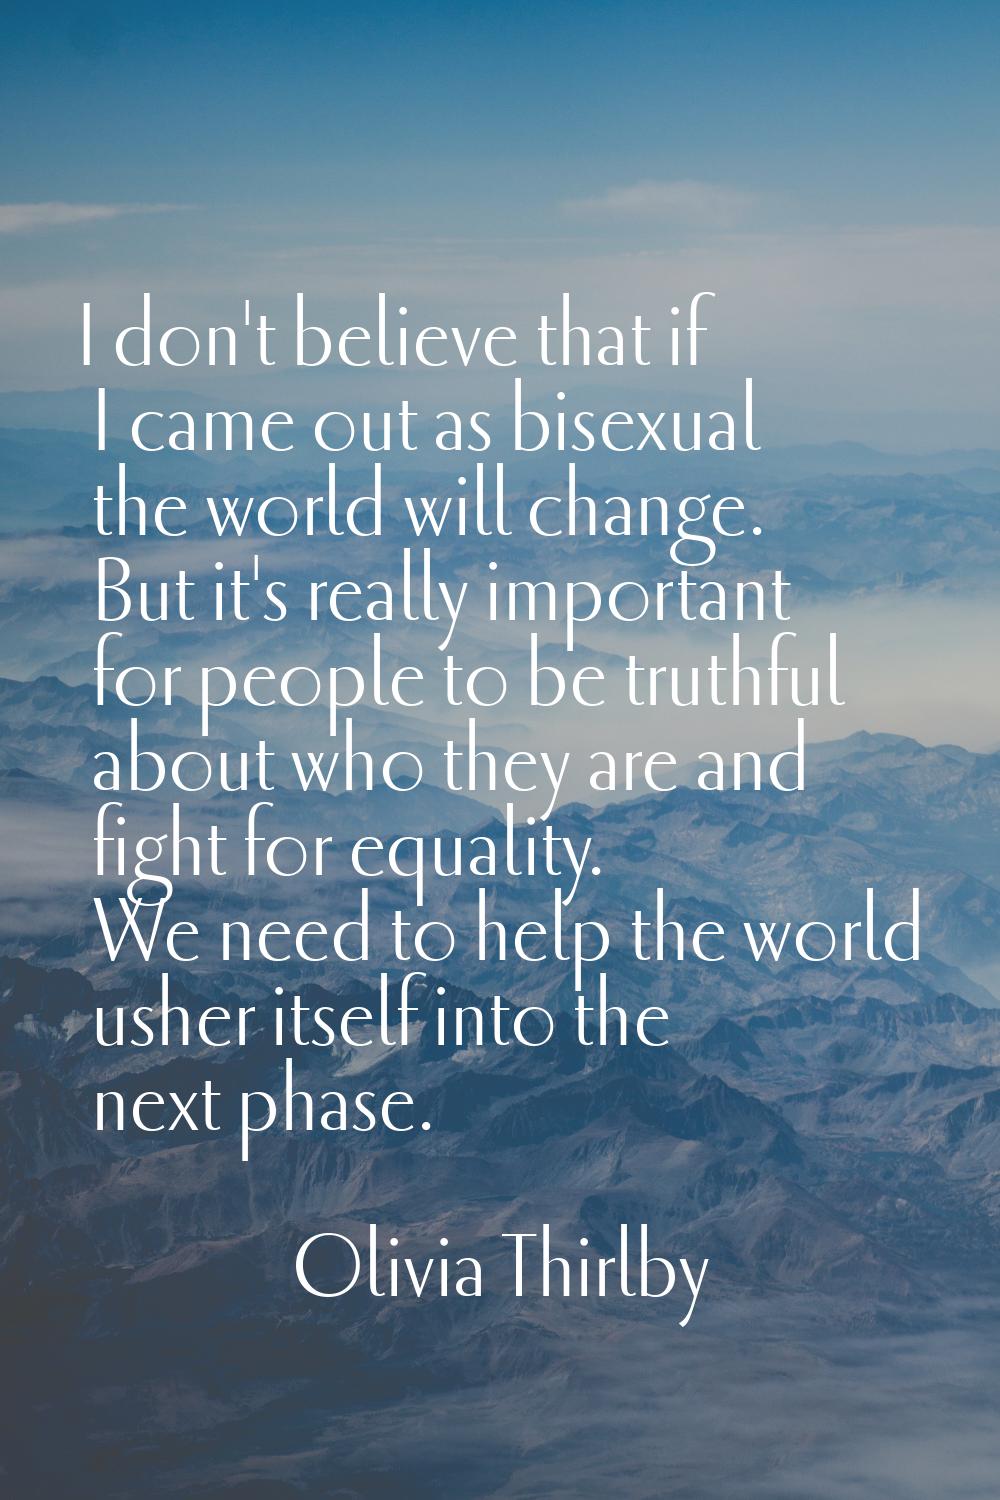 I don't believe that if I came out as bisexual the world will change. But it's really important for